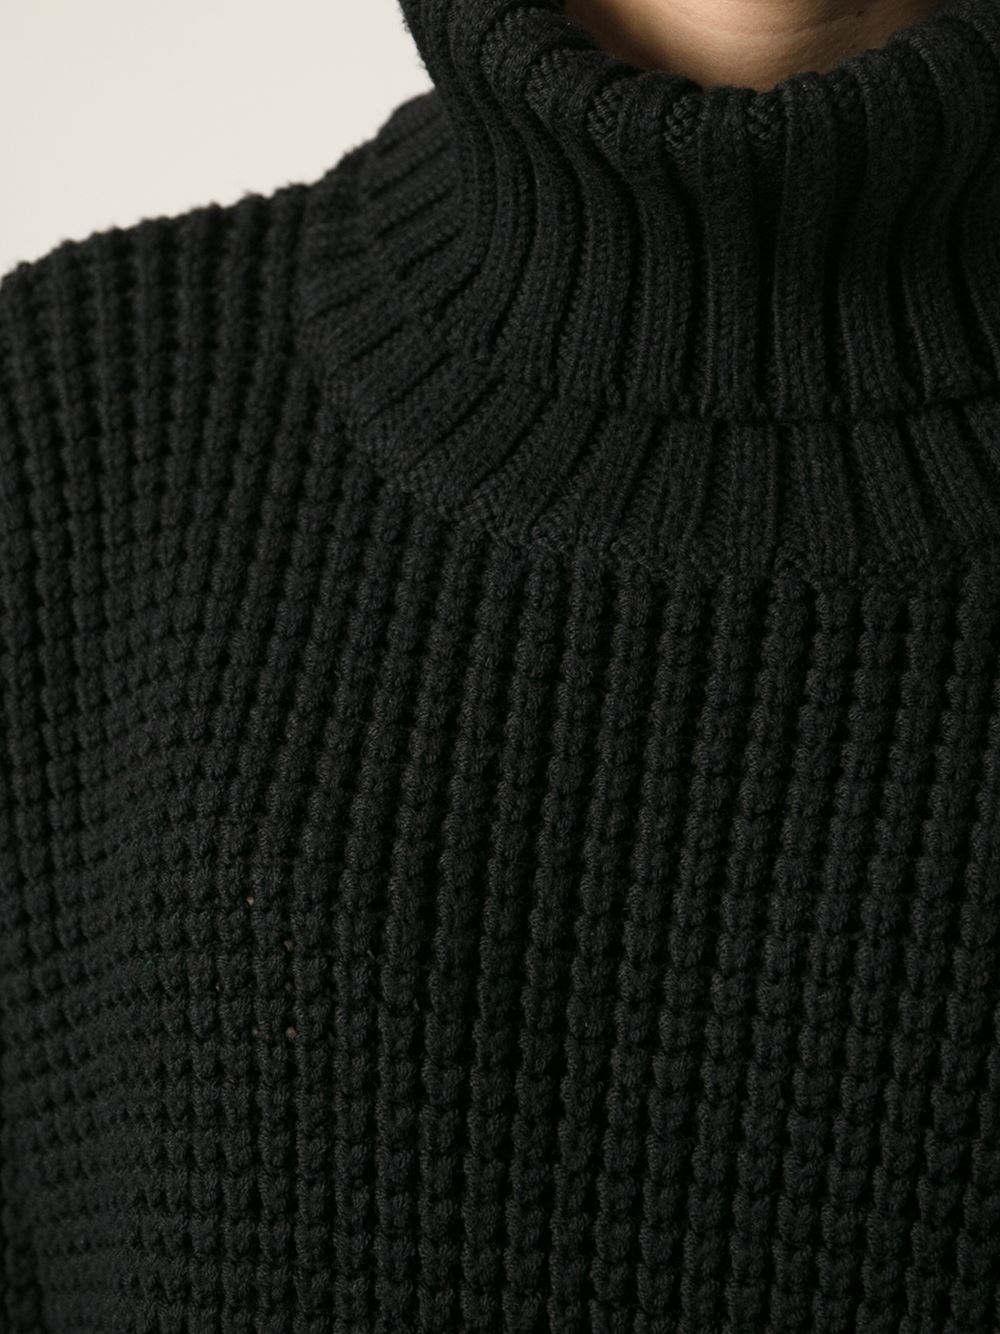 Ann demeulemeester Chunky Knit Turtle Neck Sweater in Black | Lyst